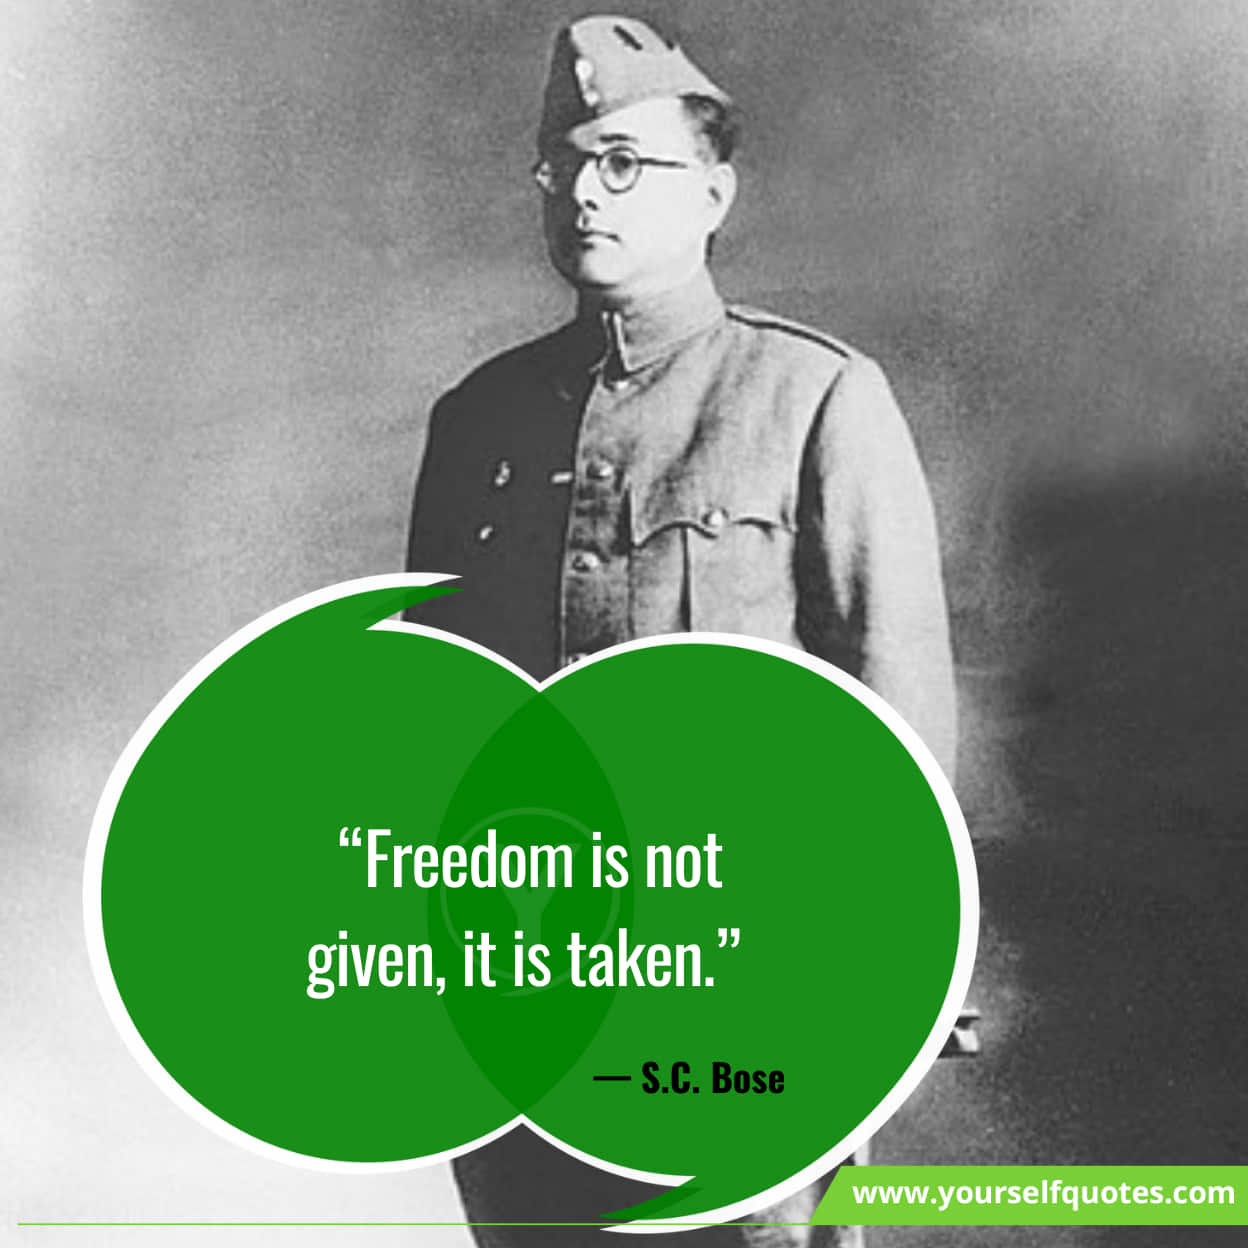 Subhas Chandra Bose Quotes For Freedom